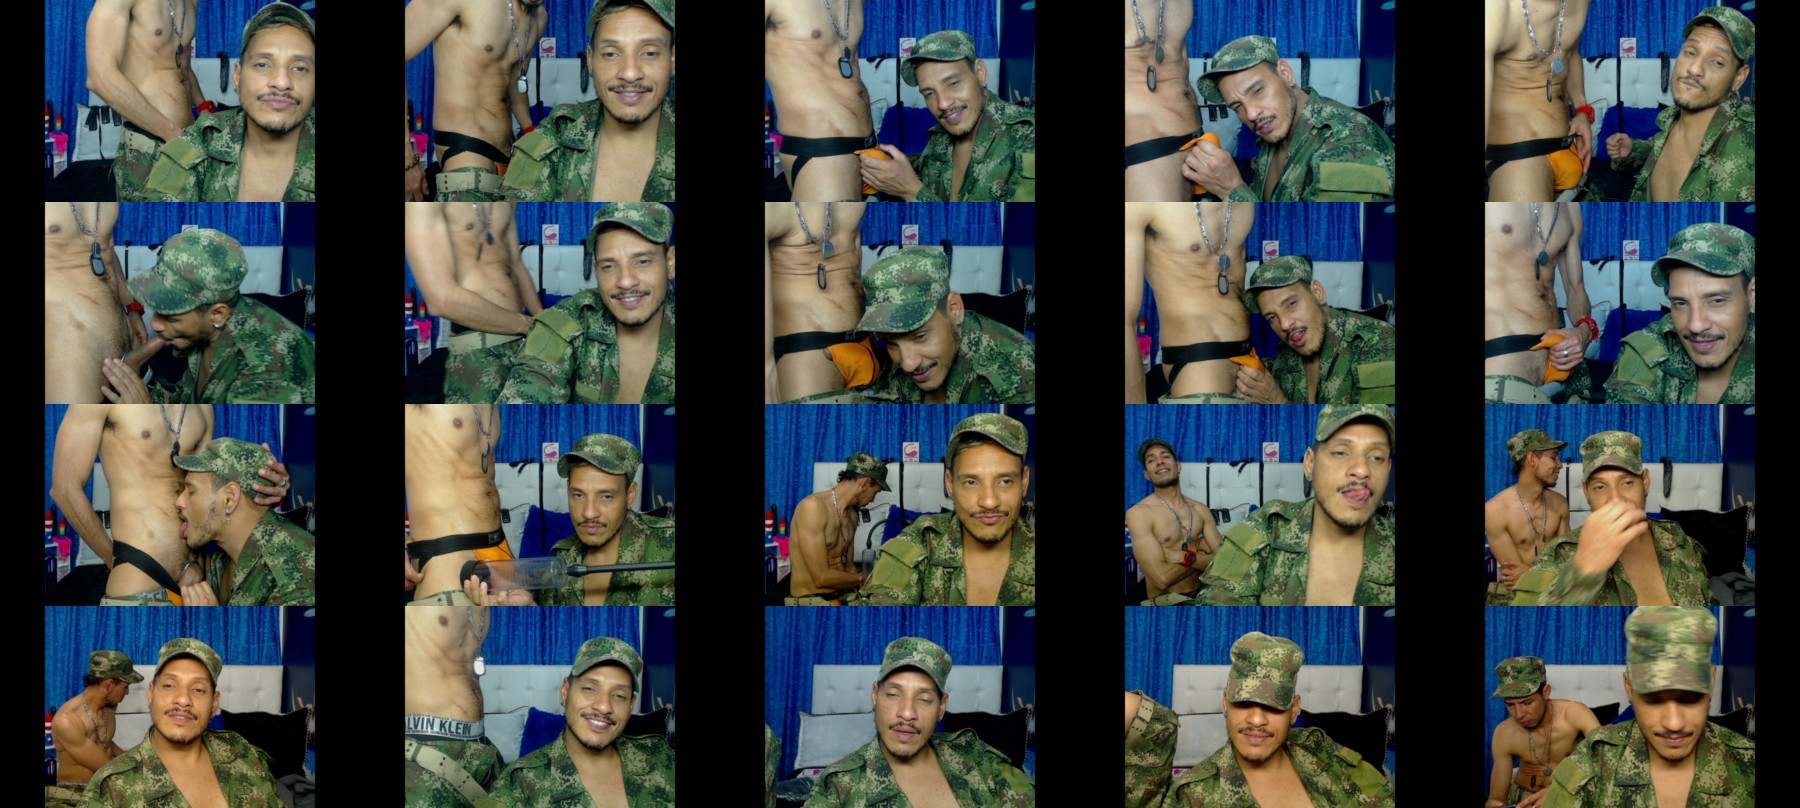 CuriousMilitary  14-04-2021 Recorded Video Topless